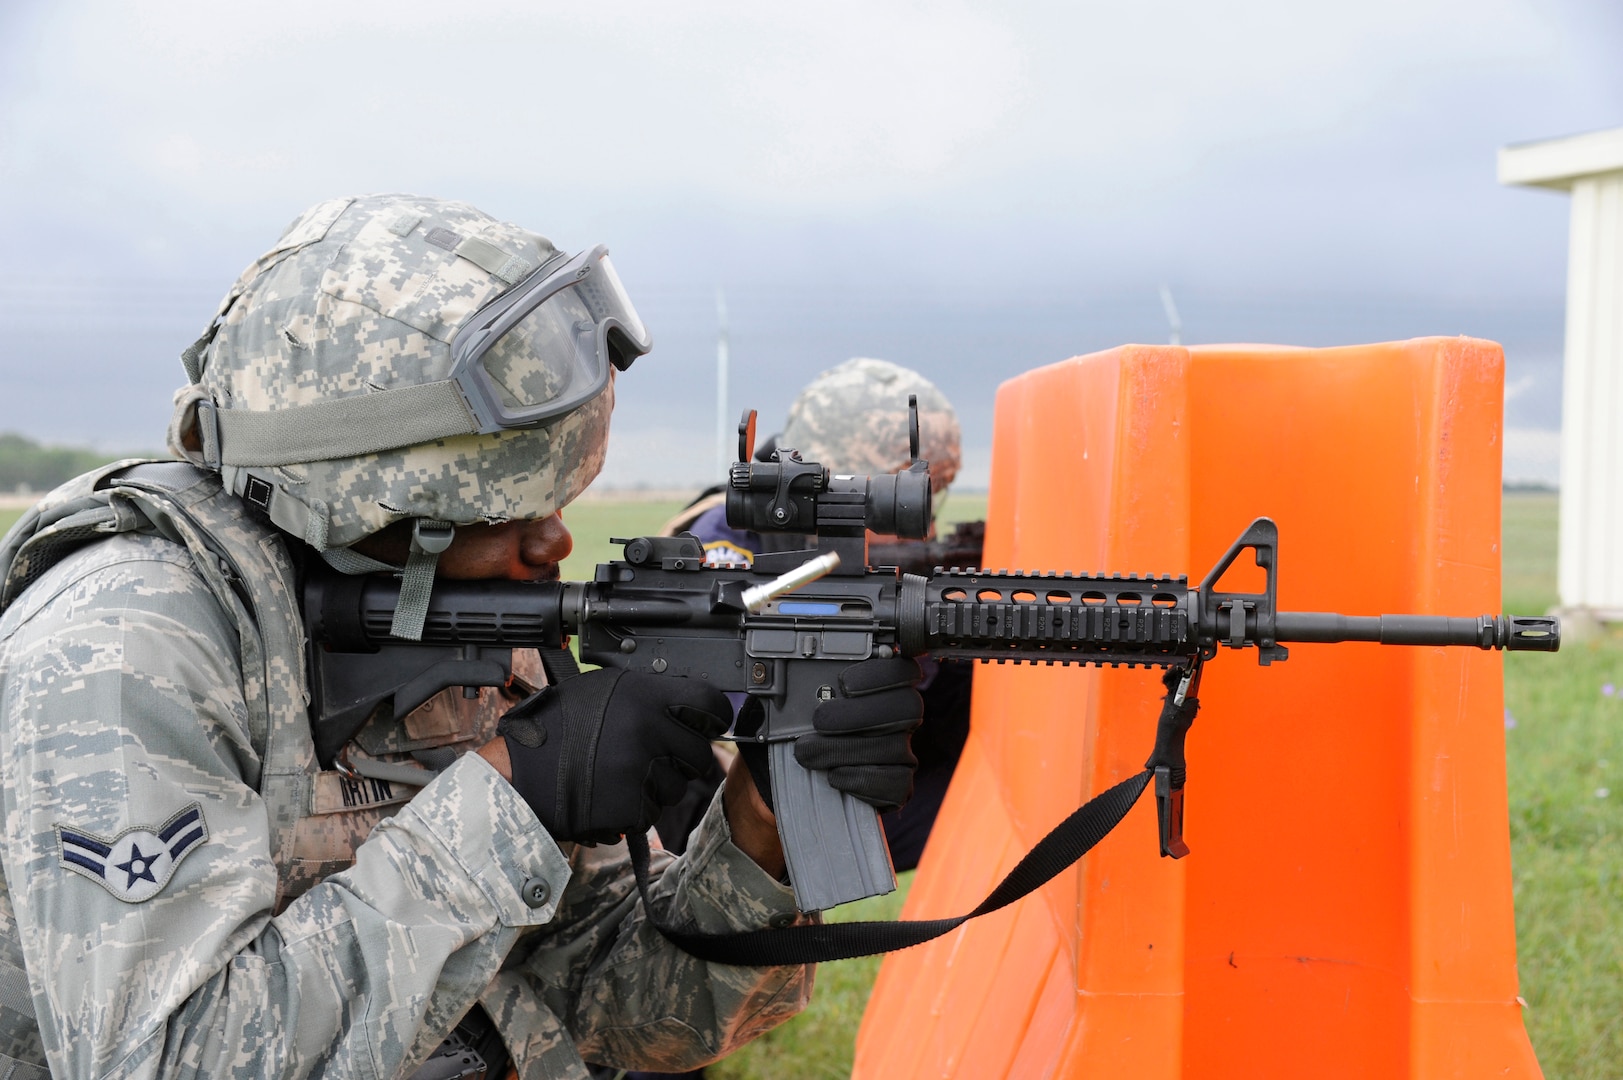 Airman 1st Class Carl Martin, 902nd Security Forces Squadron, installation police officer fires his M-4 assault rifle at his target during Shoot, Move and Communicate training at Camp Talon on Joint Base San Antonio- Randolph, June 7.  (U.S. Air Force Photo by Don Lindsey)